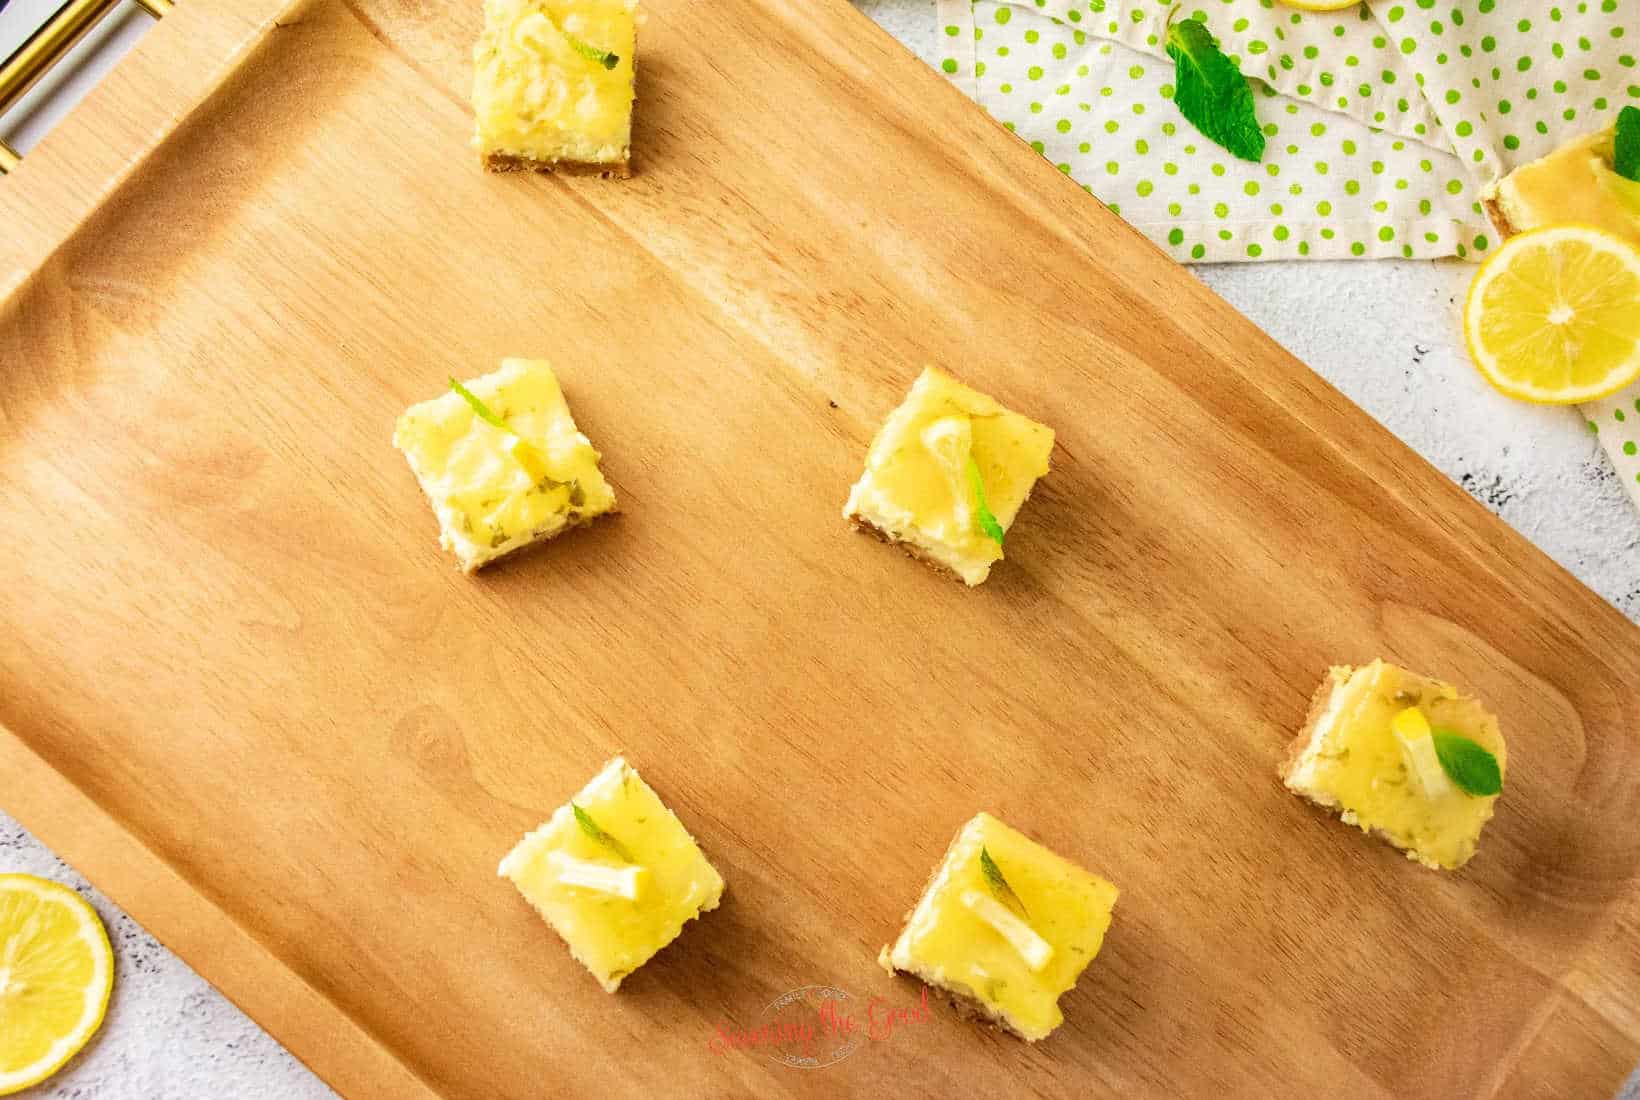 Lemon Cheesecake Bars with mint leaf garnish on a wooden serving board